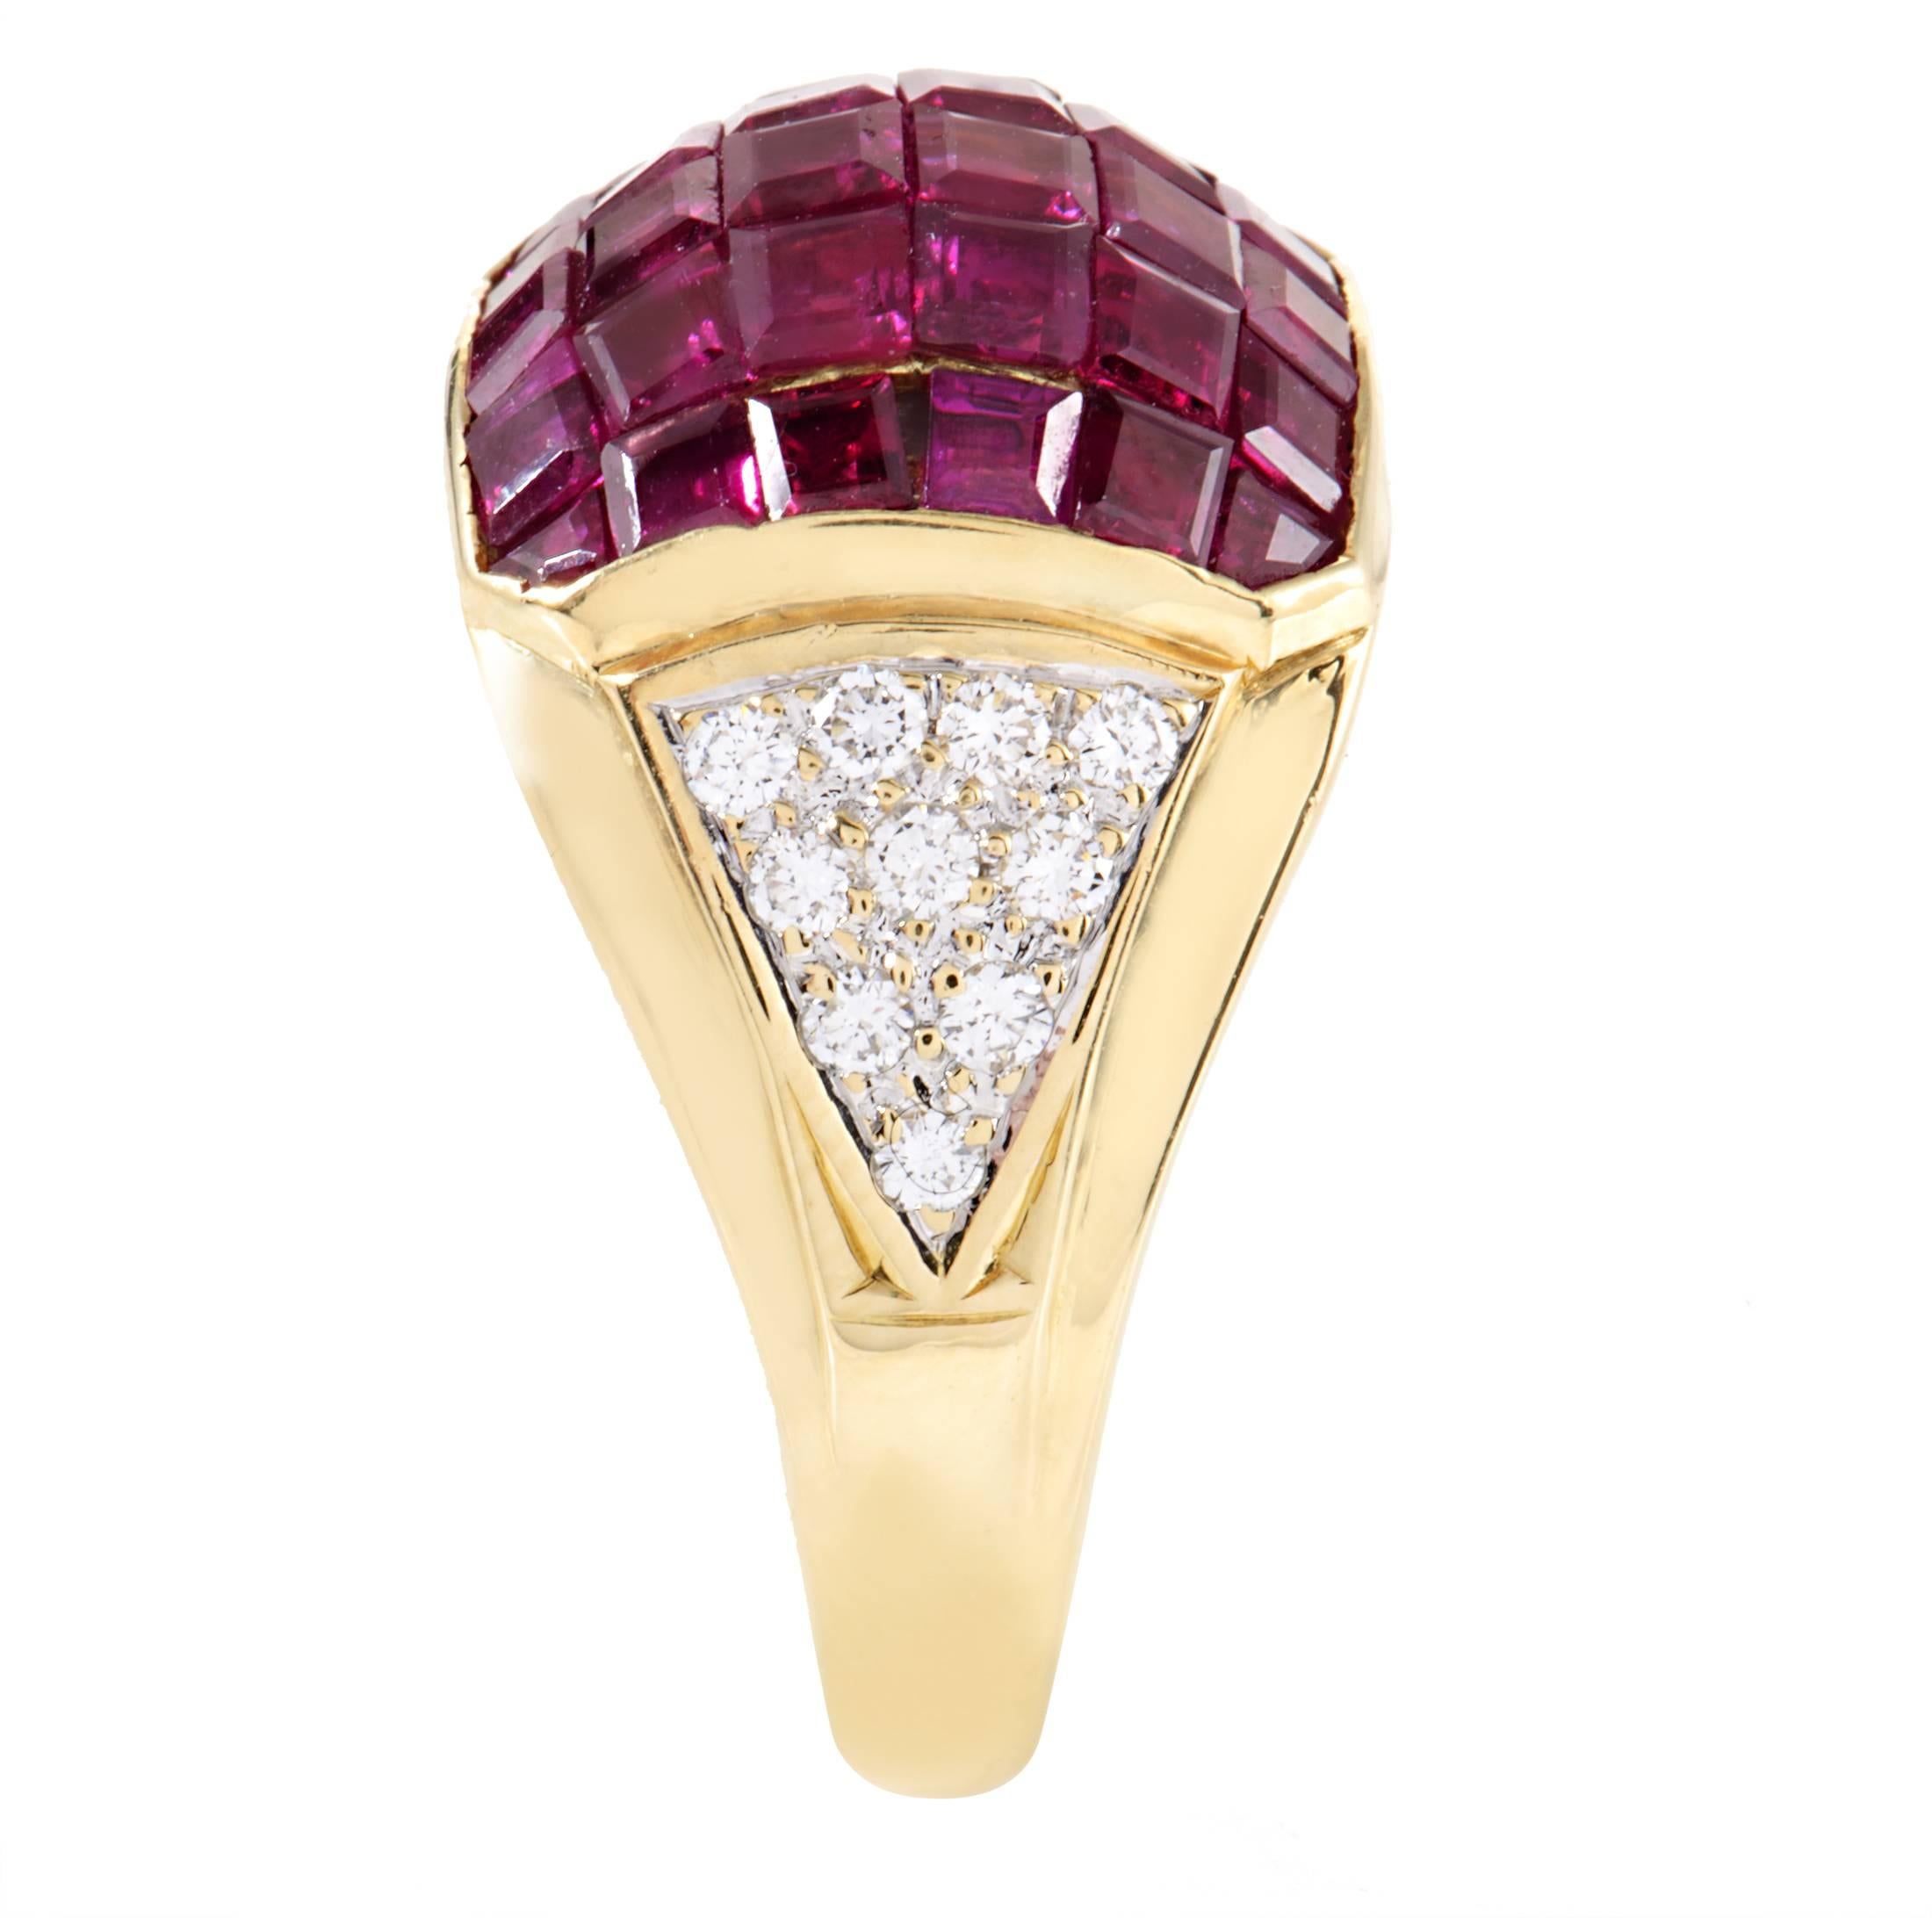 The marvelous arrangement of enchanting fancy-cut rubies amounting to 3.05 carats and scintillating setting of diamonds weighing in total 0.50ct embellish the classically designed body of this delightful 18K yellow gold ring.
Ring Size: 7.75 (55